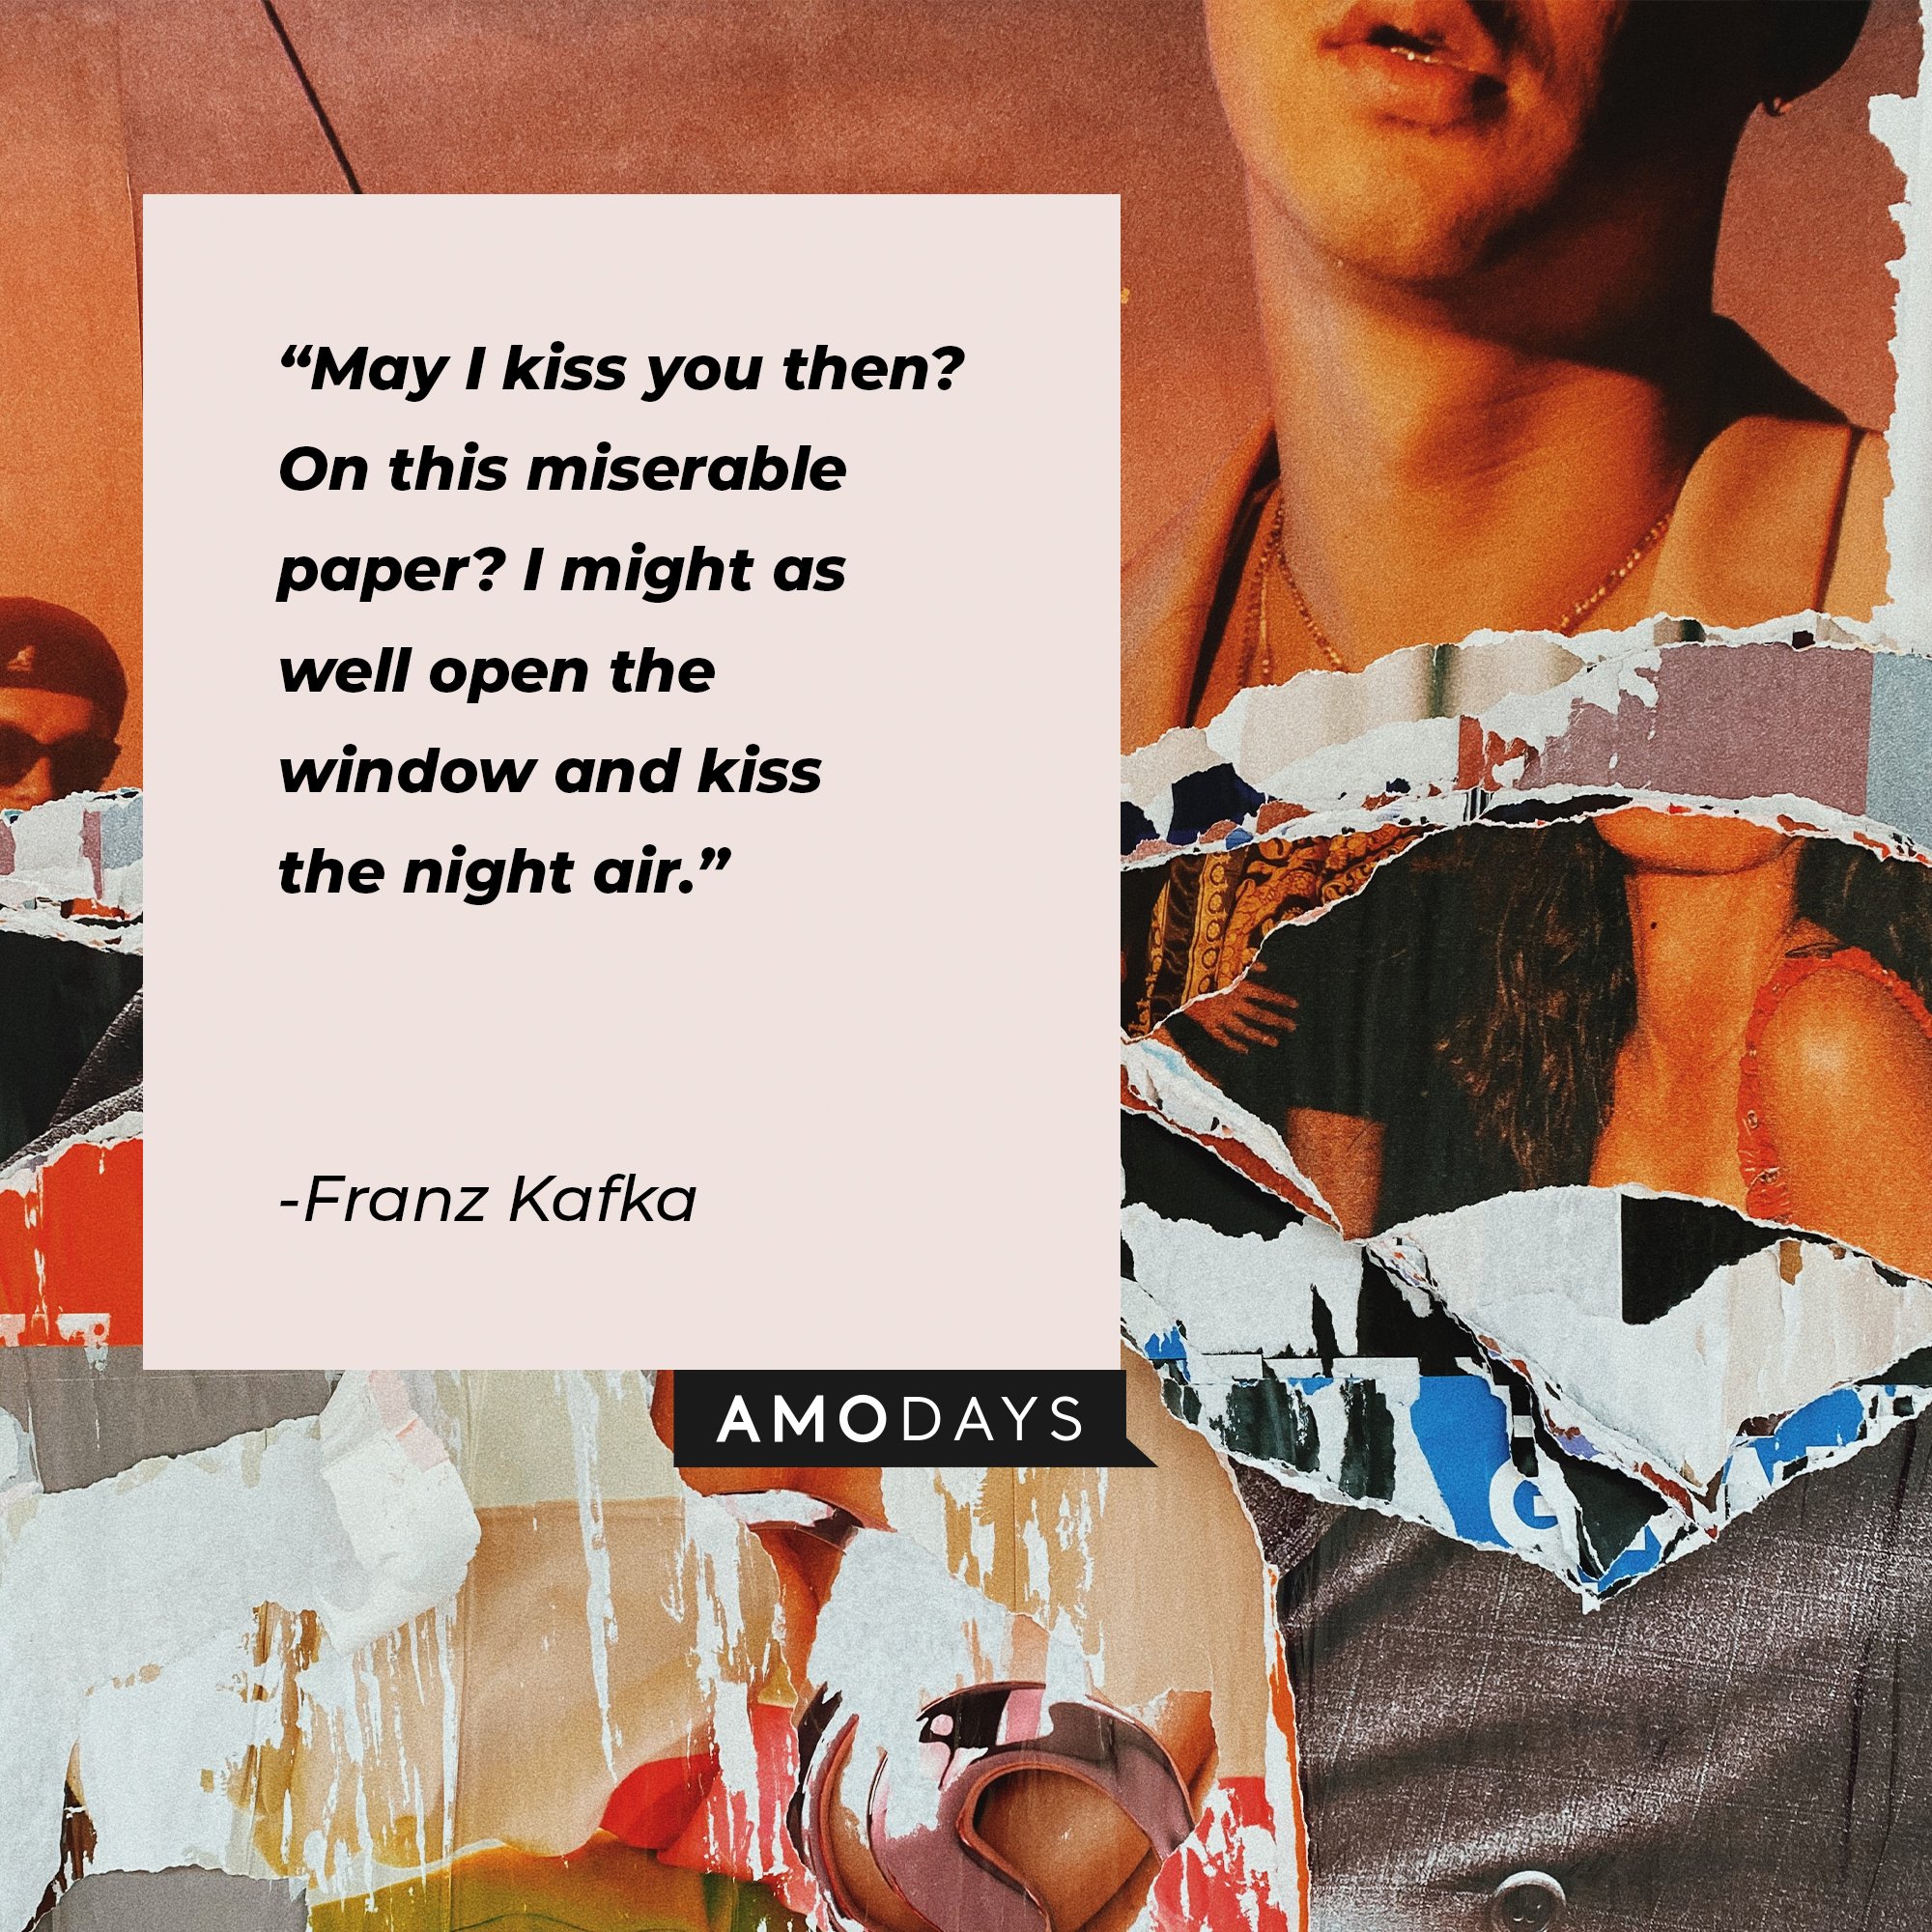 Franz Kafka’s quote: "May I kiss you then? On this miserable paper? I might as well open the window and kiss the night air." | Image: AmoDays